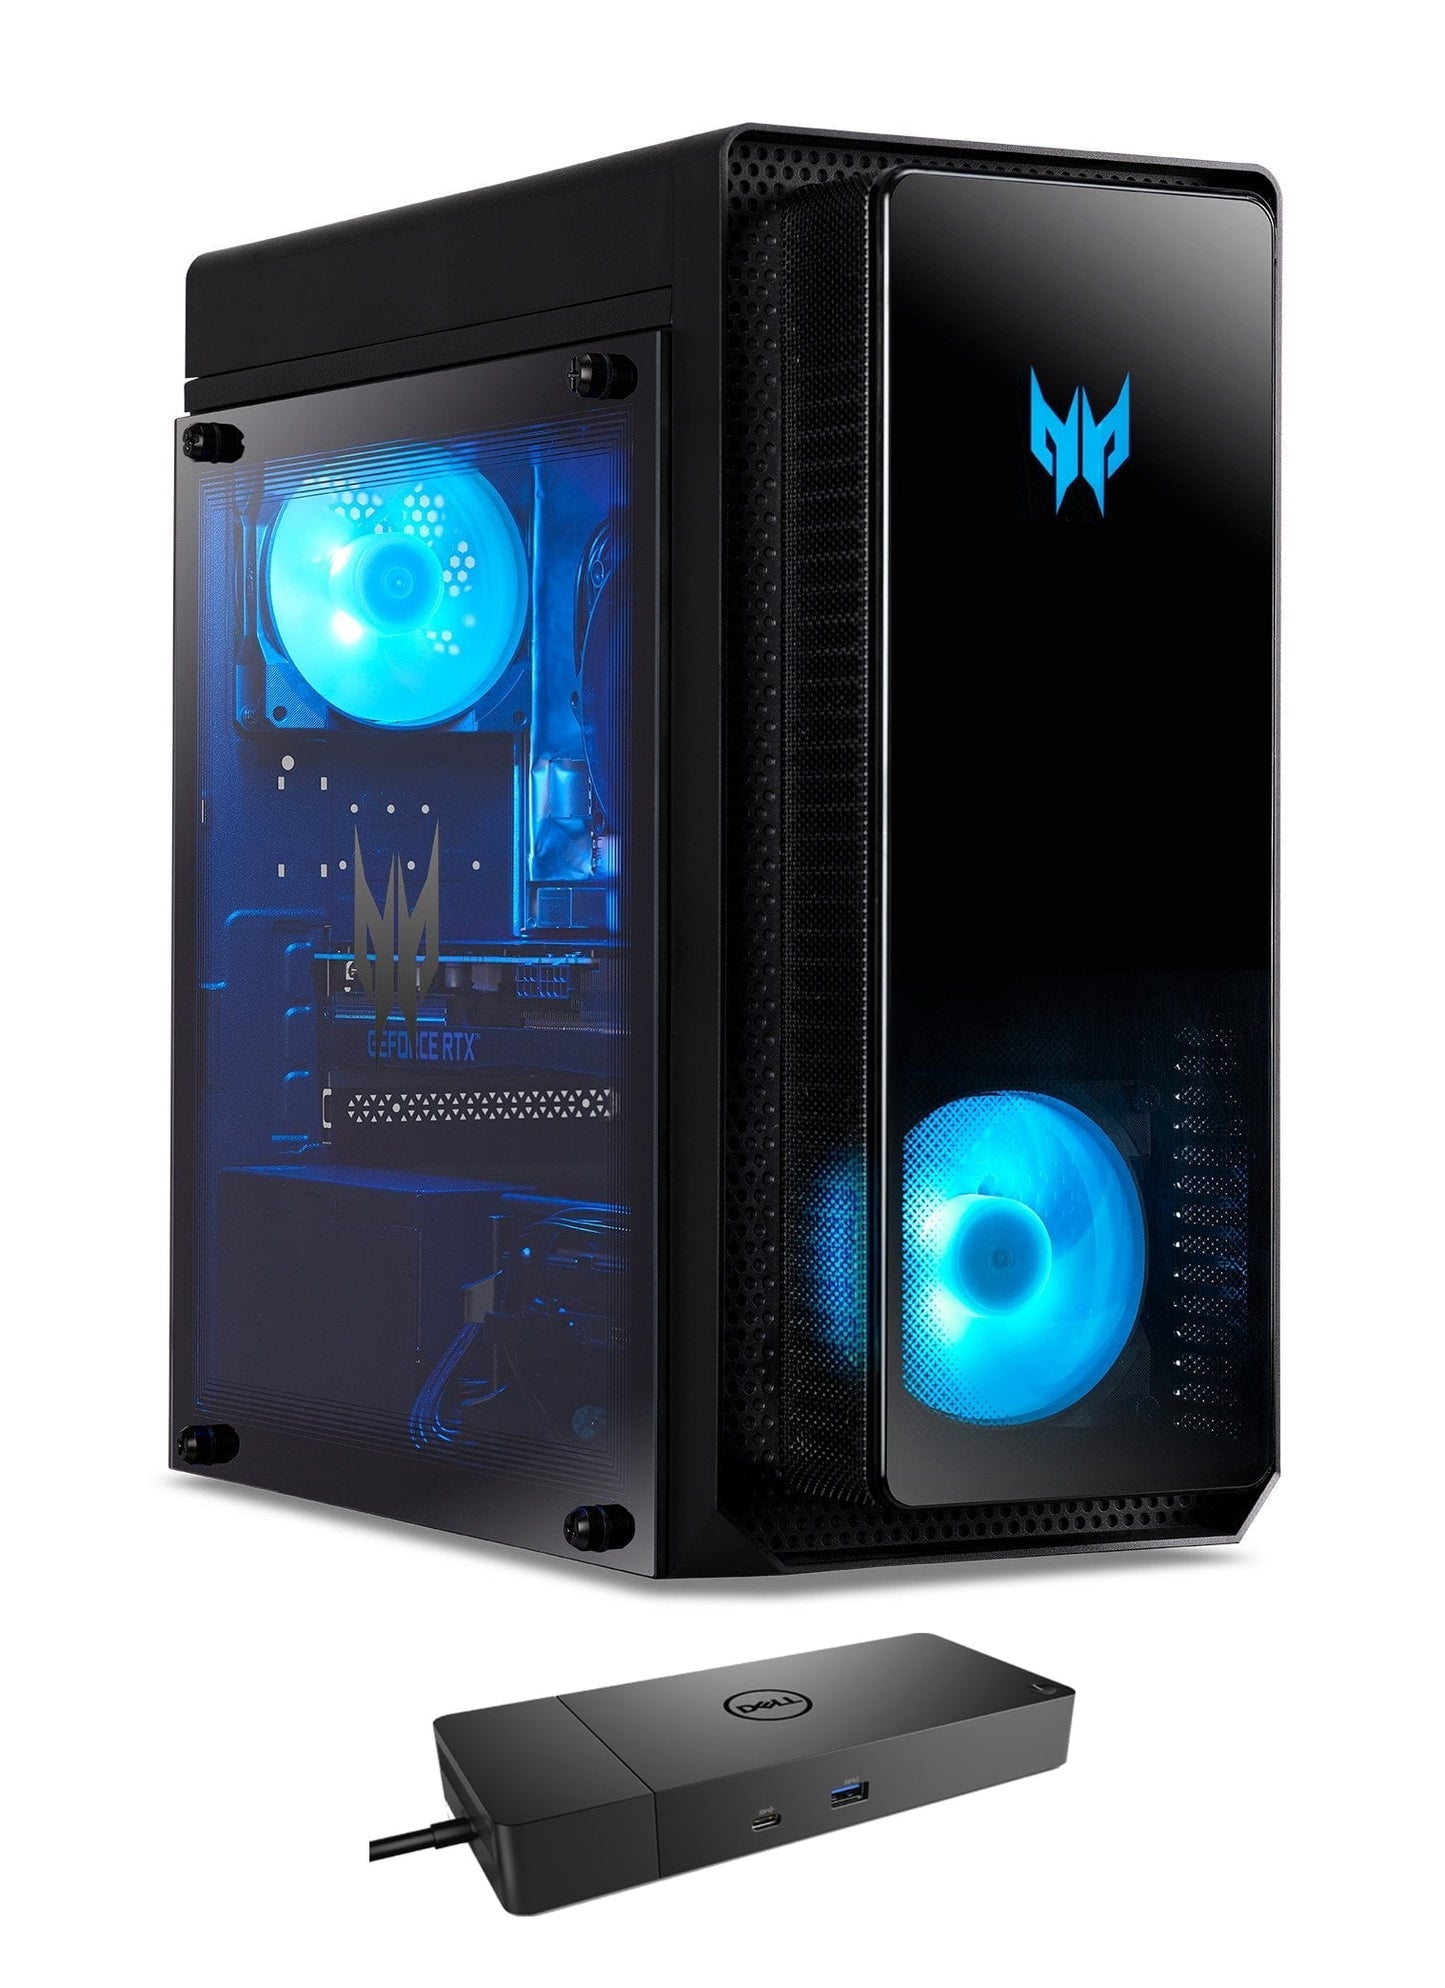 Acer Predator Orion 3000 Gaming/Entertainment Desktop PC (Intel i7-12700F 12-Core. NVIDIA GeForce RTX 3070. 128GB RAM. Win 11 Home) with WD19S 180W Dock